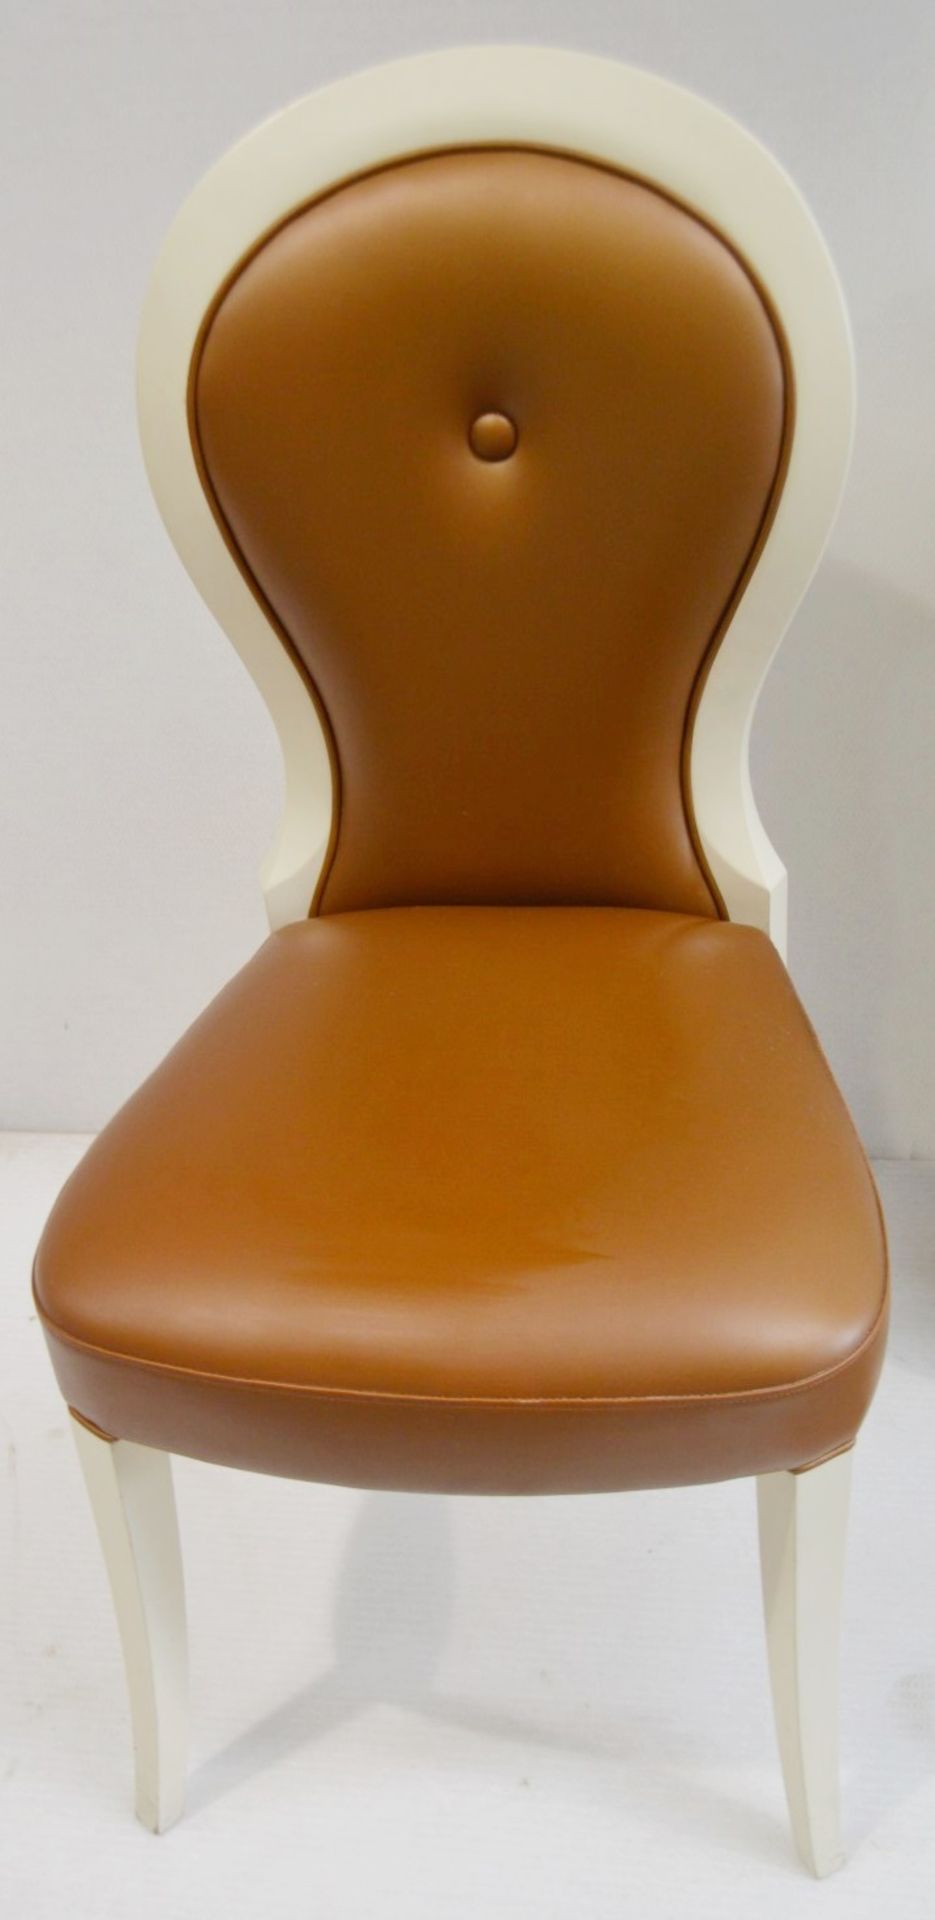 1 x Cushion Backed Chair With Curved Legs - Dimensions: H100 x W49 x D50cm / Seat 48cm - Ref: HMS128